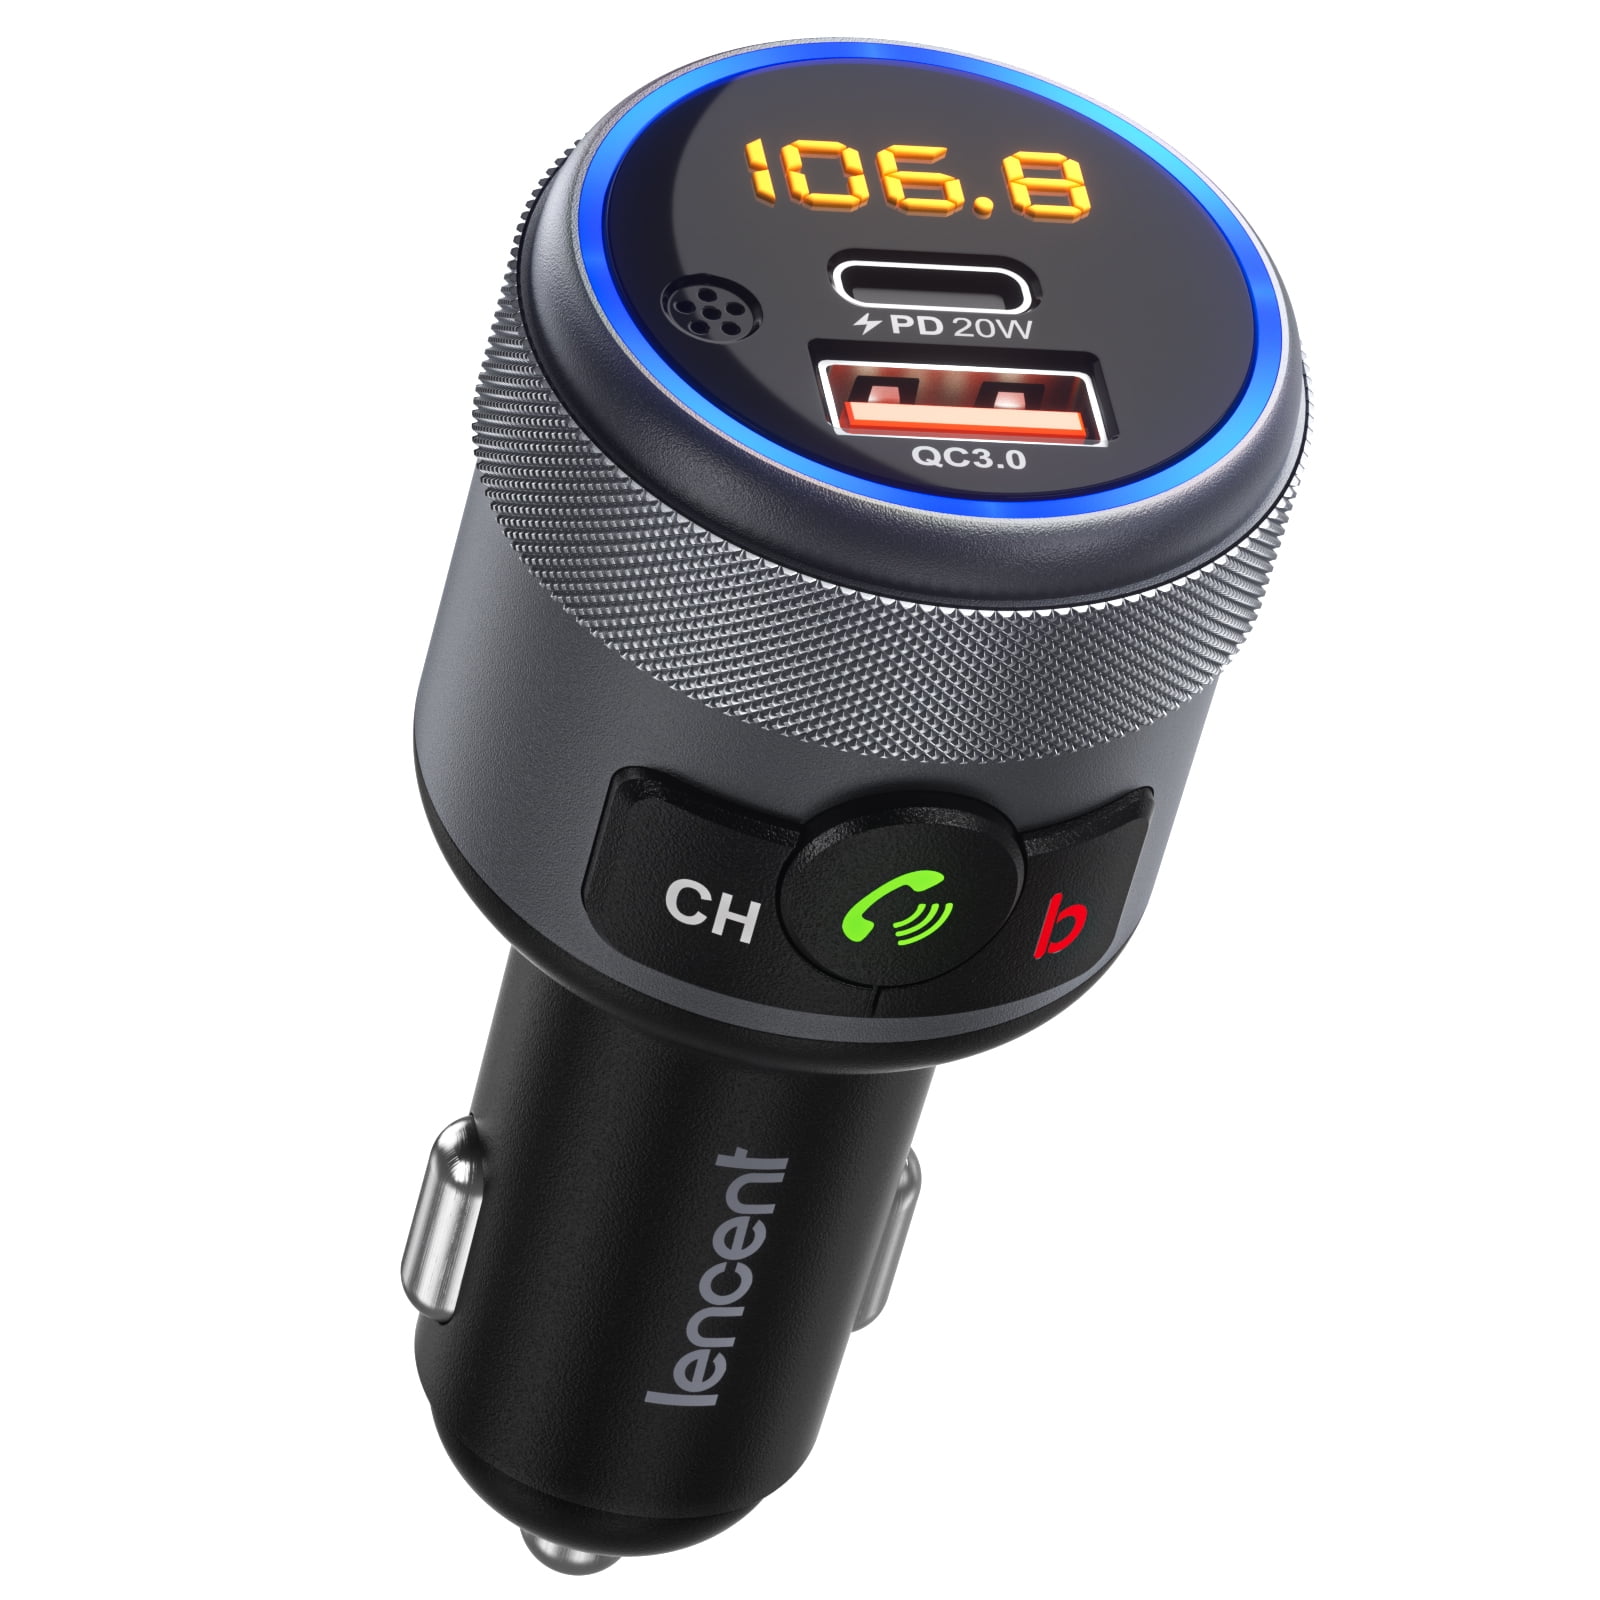 LENCENT Car FM Transmitter, Wireless Bluetooth 5.1 Radio Adapter Car Kit  with Big Button, Type C PD 20W and QC3.0 18W Car Fast Charger, Bass  Lossless